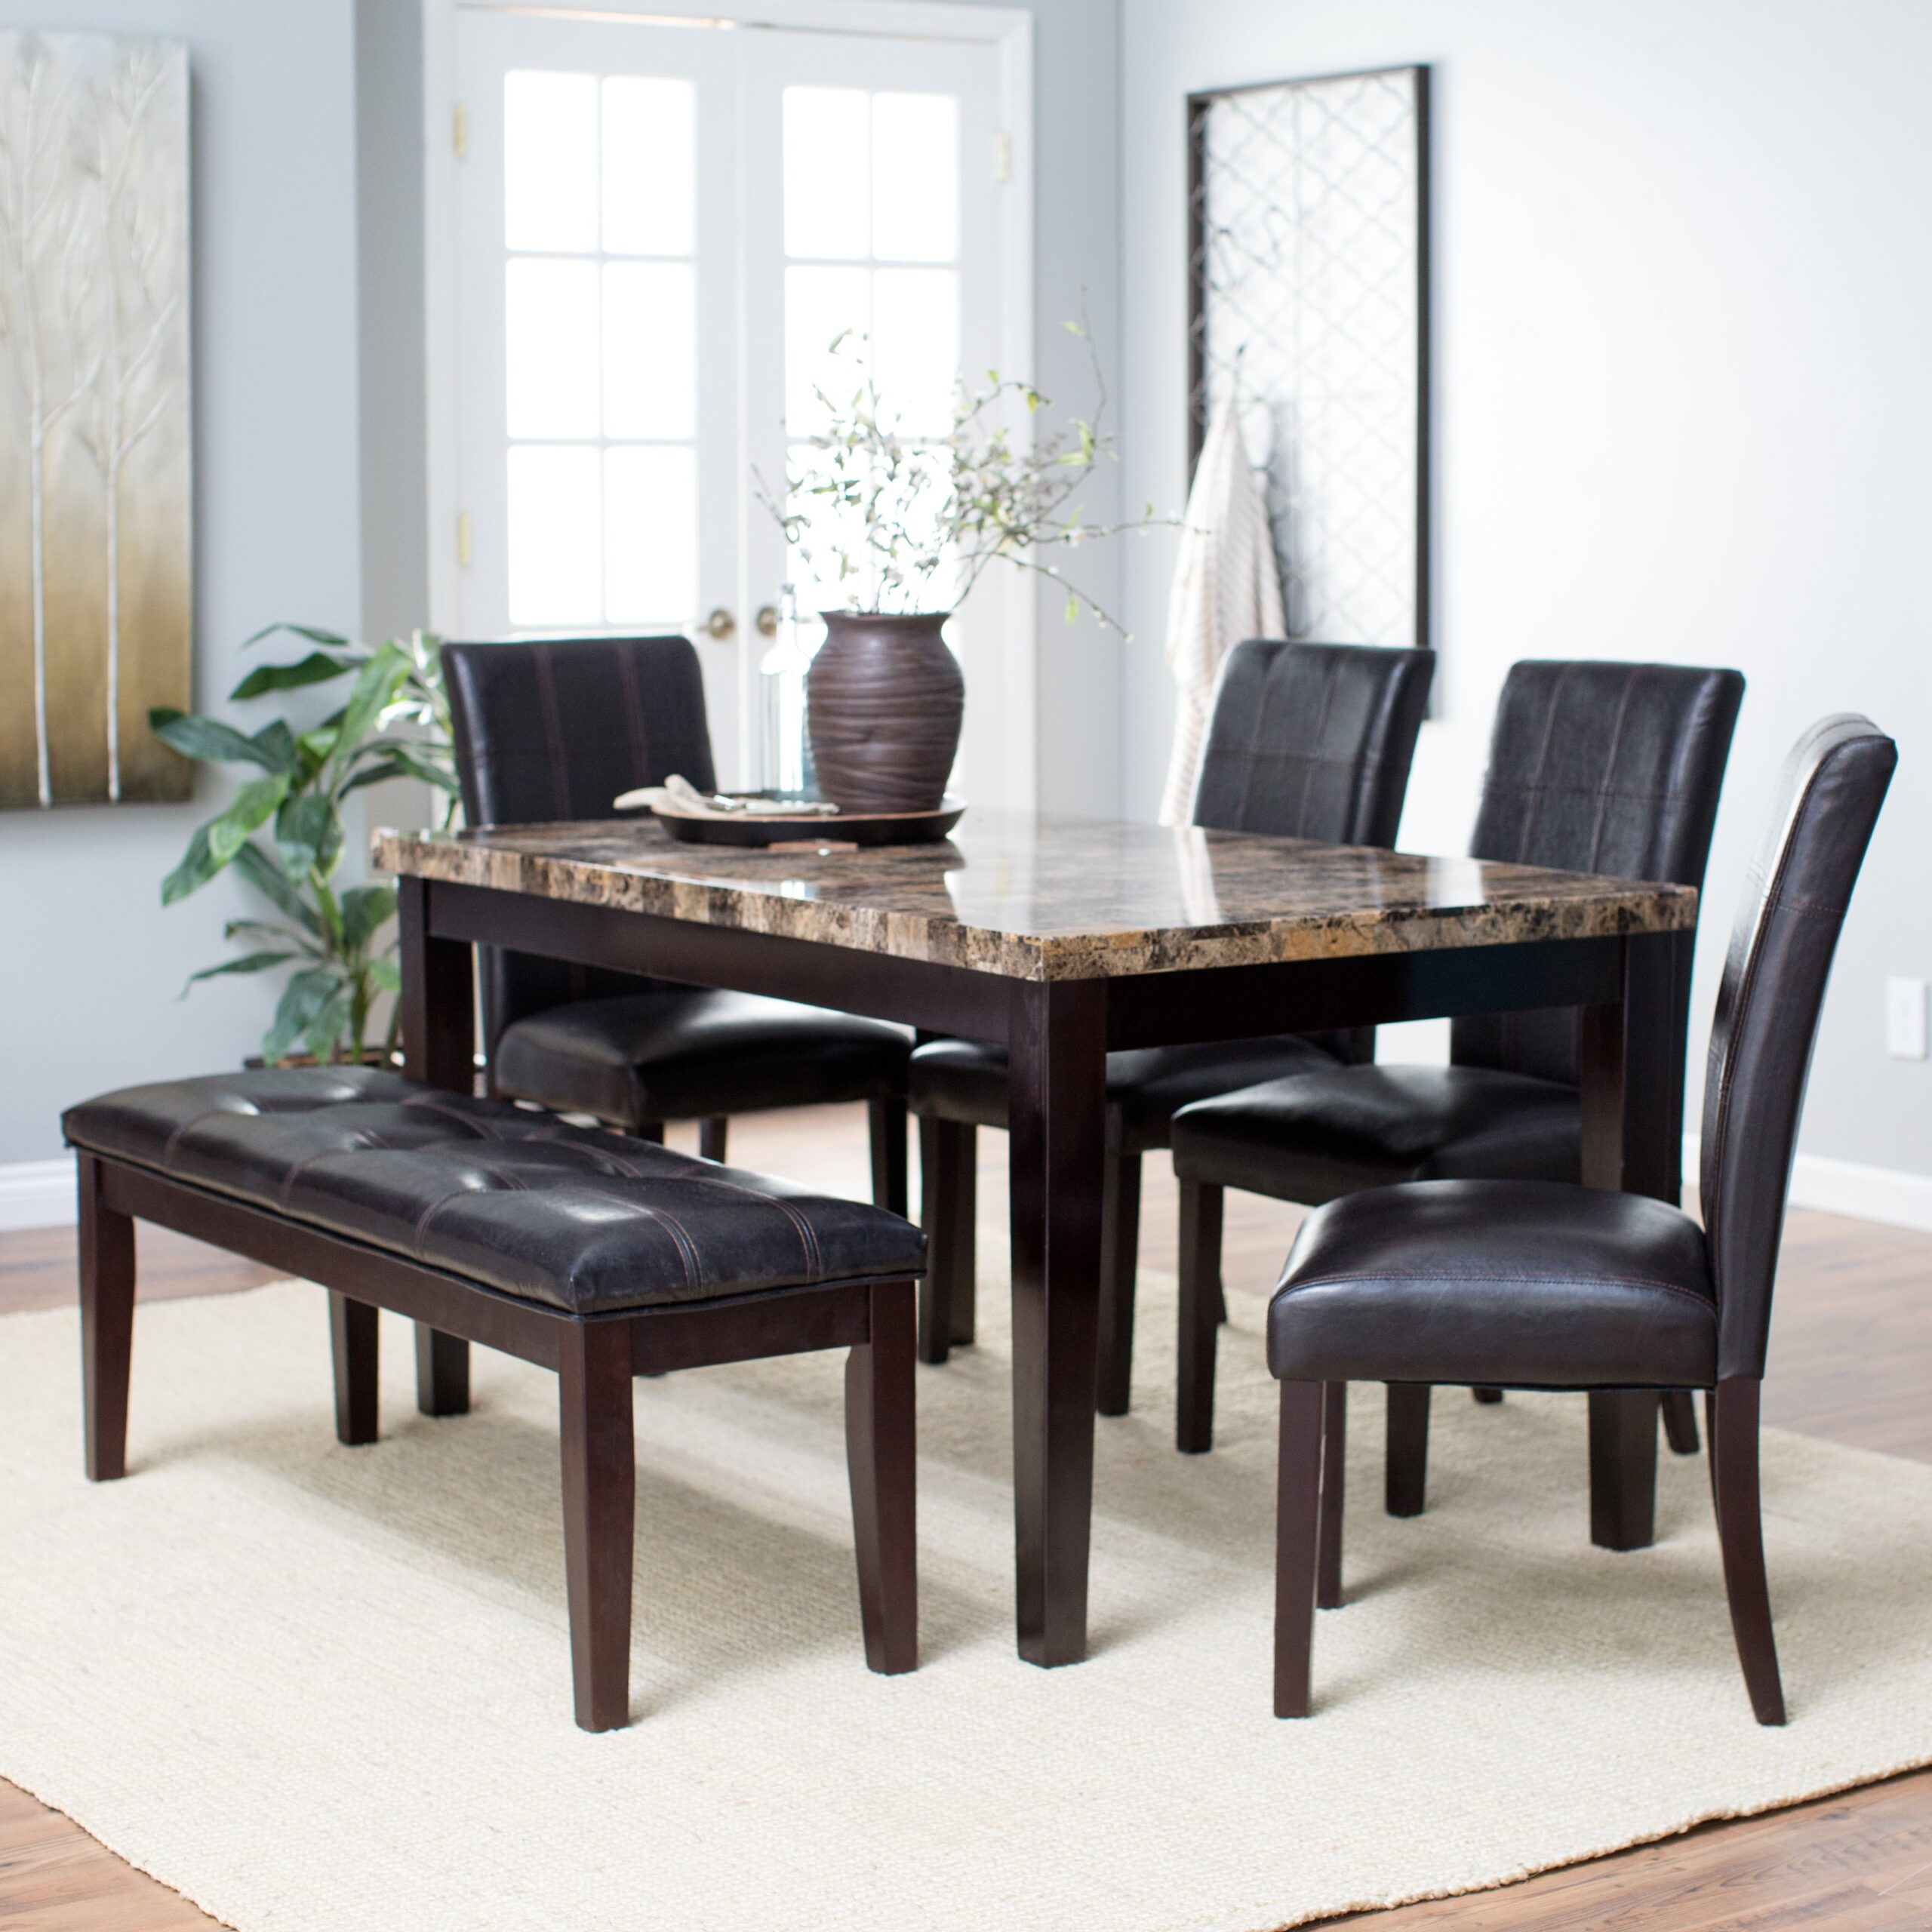 Types of dining table sets